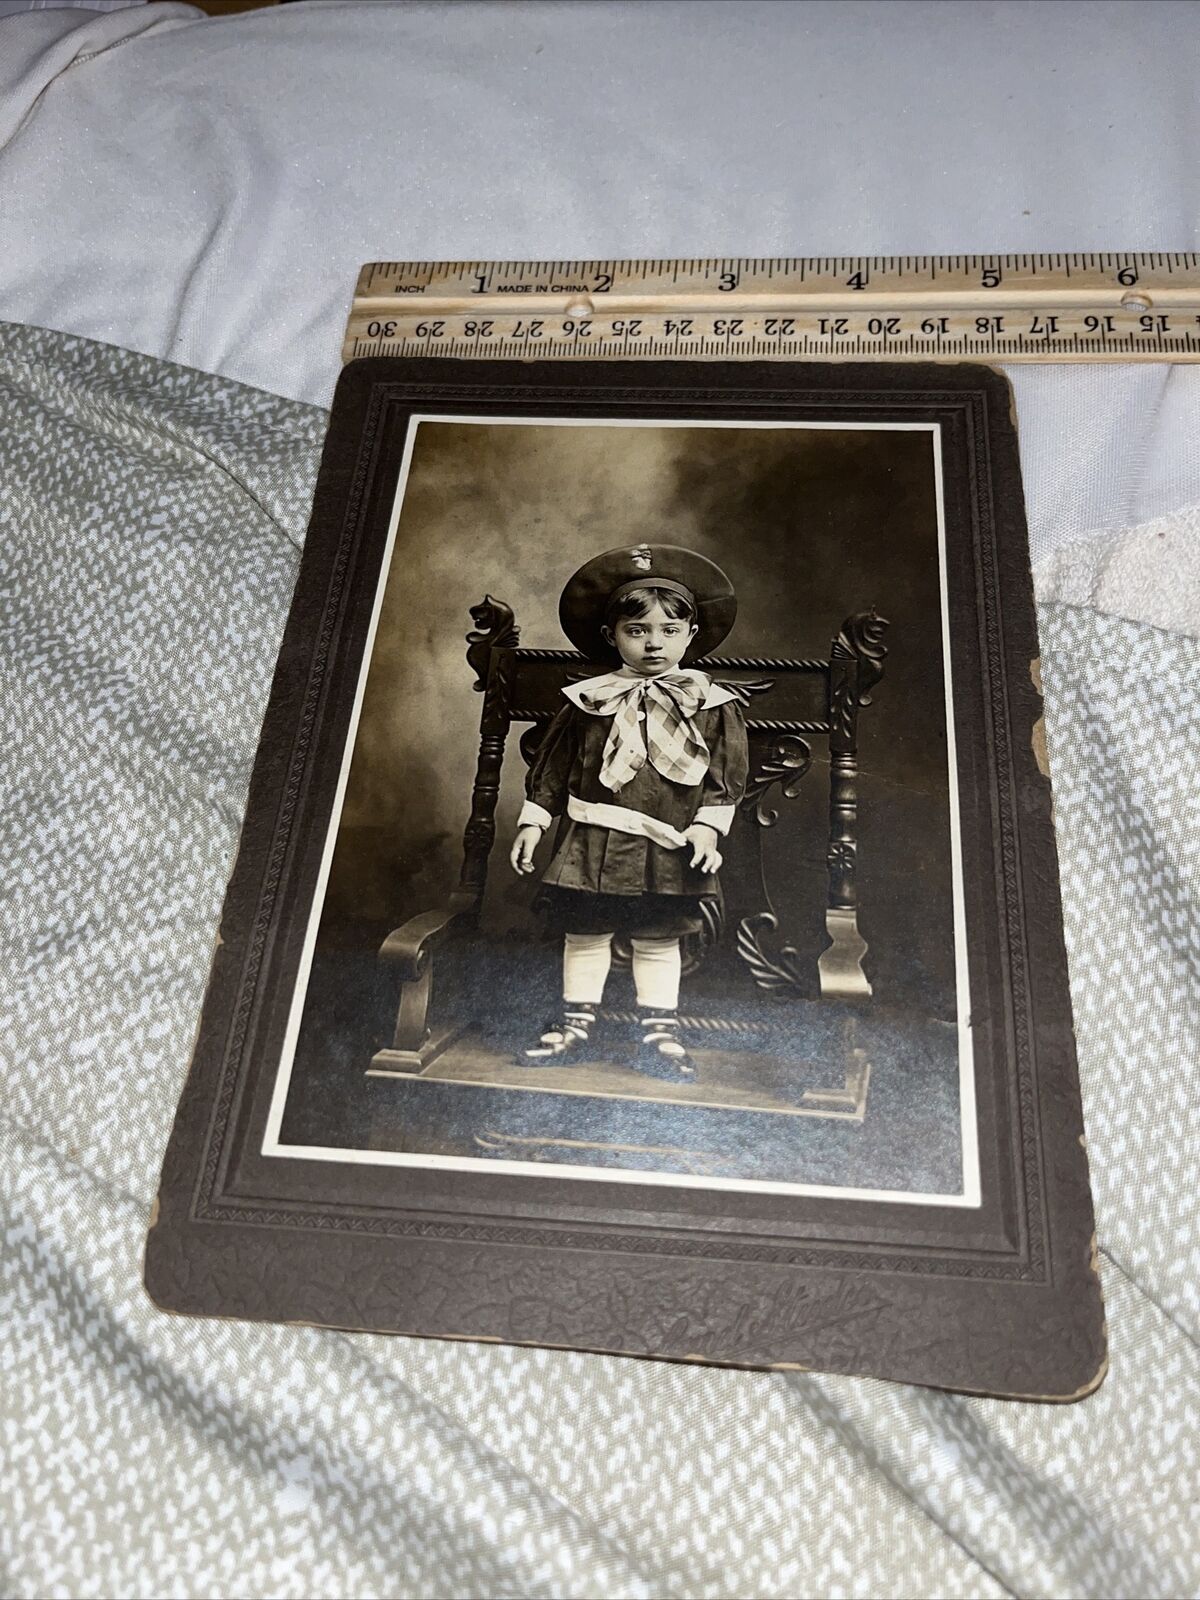 Antique Cabinet Card: Well Dressed Child on Chair - Looks Creepy Ominous Stare